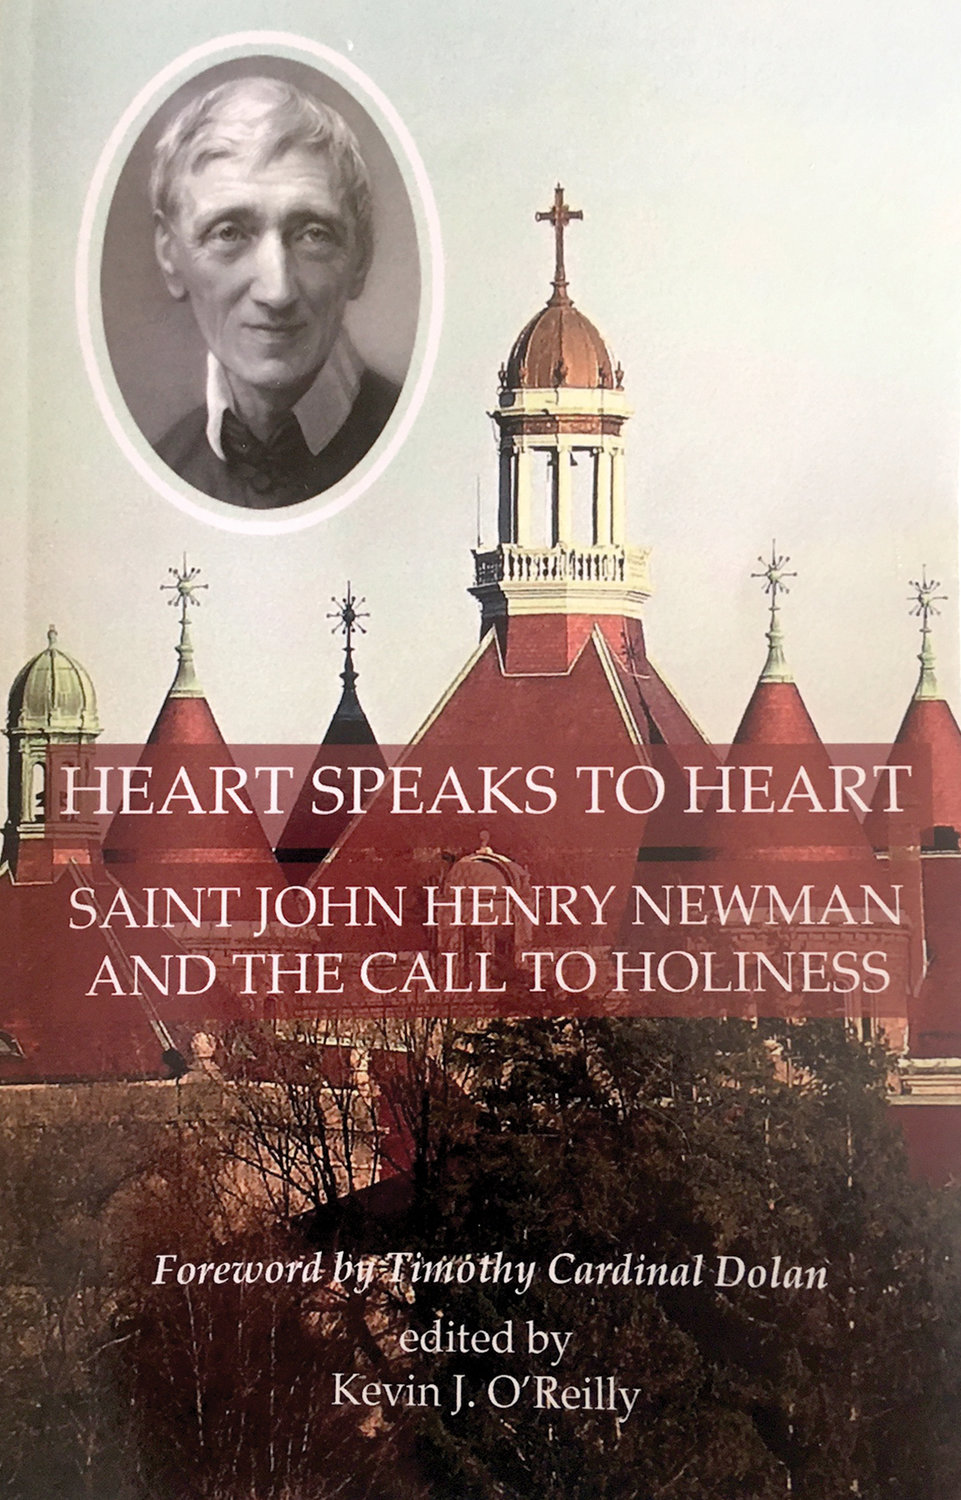 The cover of the newly published book, “Heart Speaks to Heart: Saint John Henry Newman and the Call to Holiness,” features contributions from all the speakers at the conference.